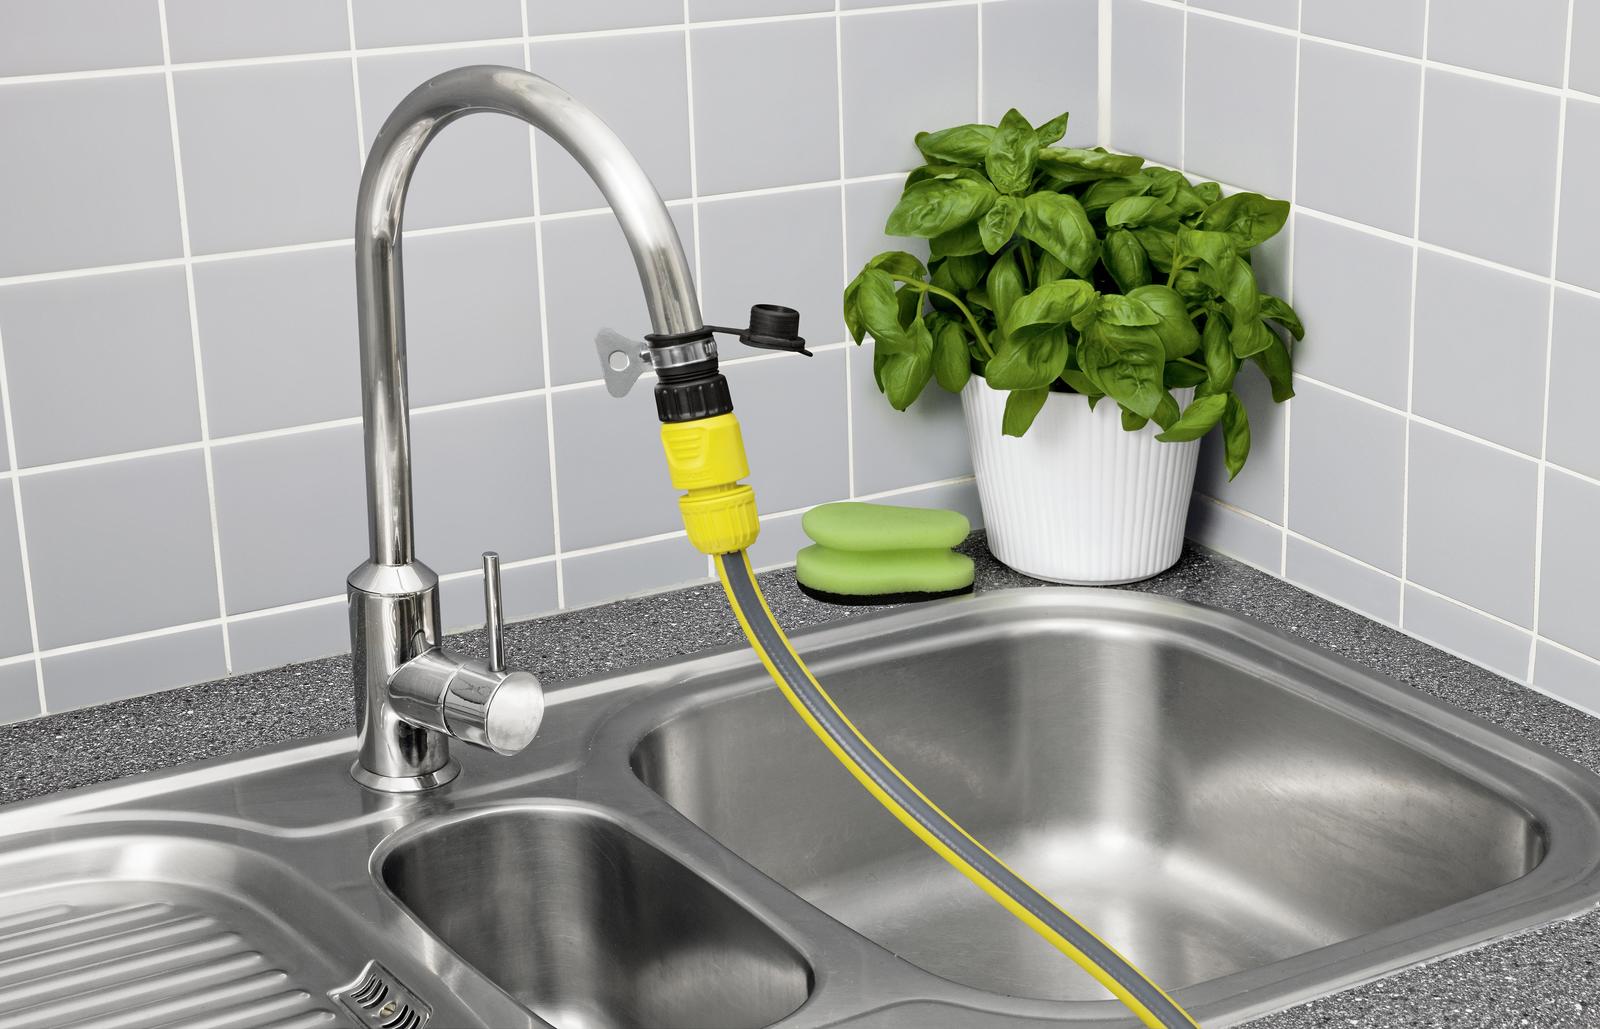 kitchen sink hose for watering plants